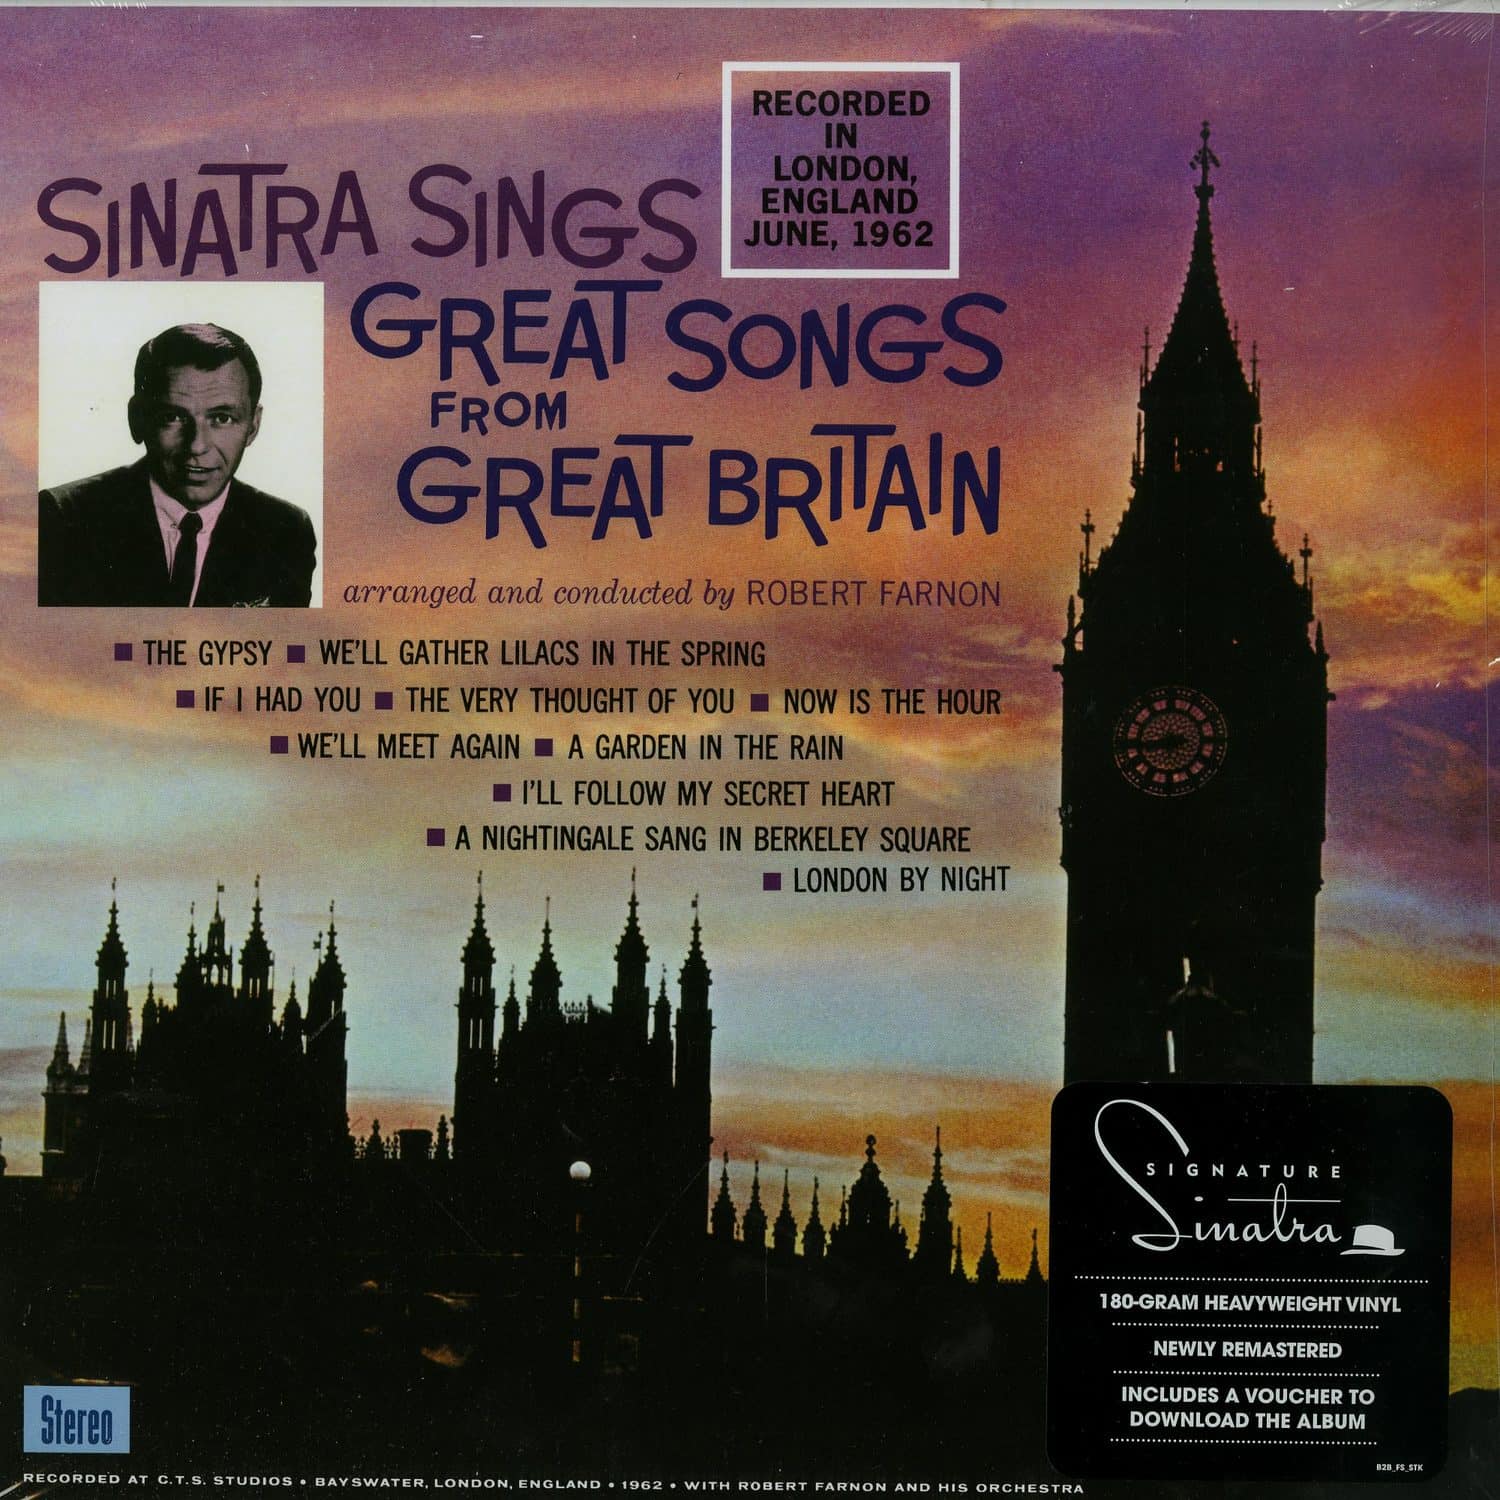 Frank Sinatra - GREAT SONGS FROM GREAT BRITAIN 